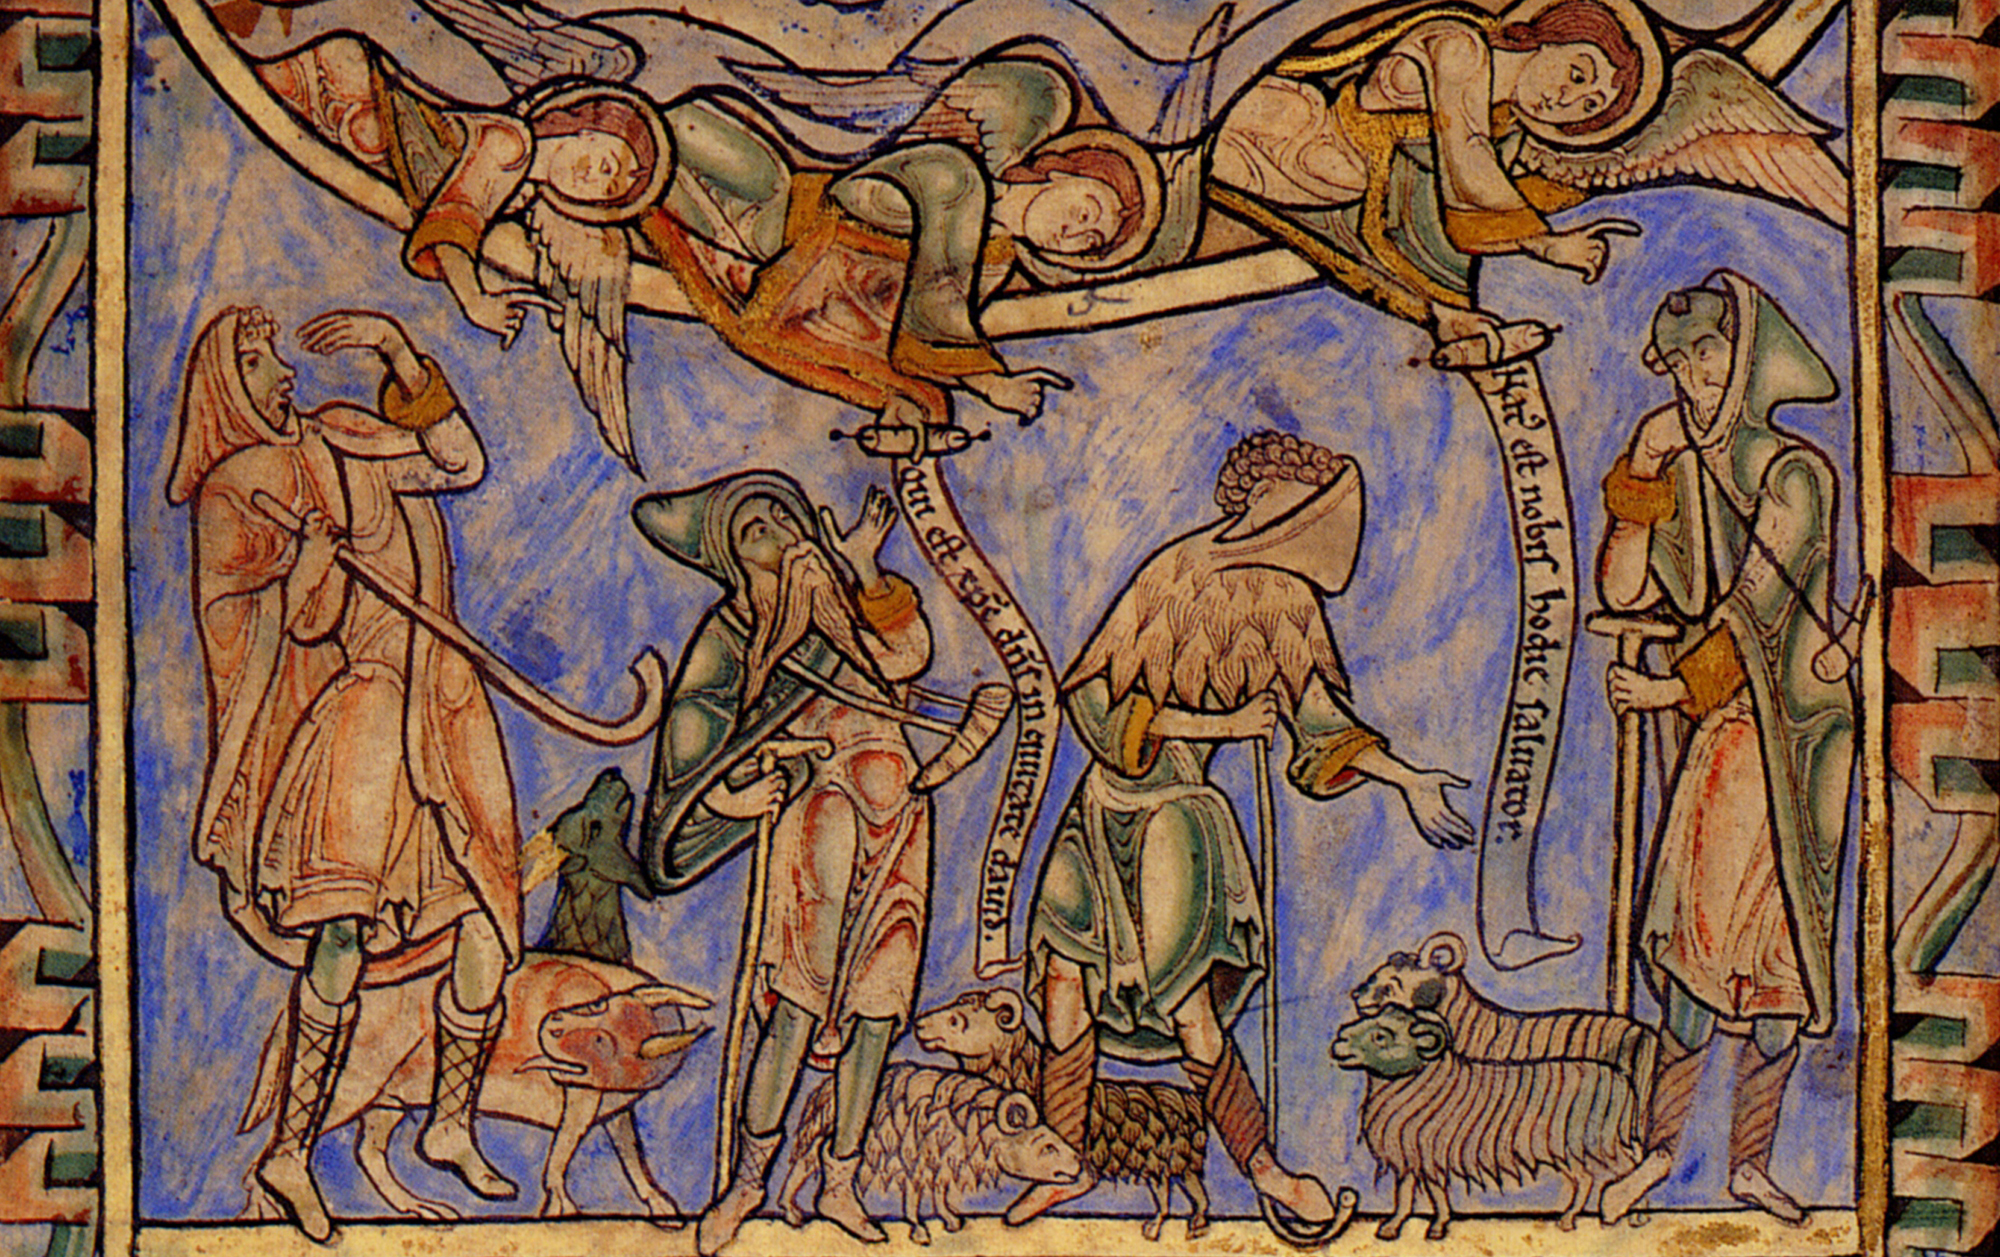 The Annunciation to the Shepherds and the Magi before Herod from the Winchester Psalter of Henry de Blois